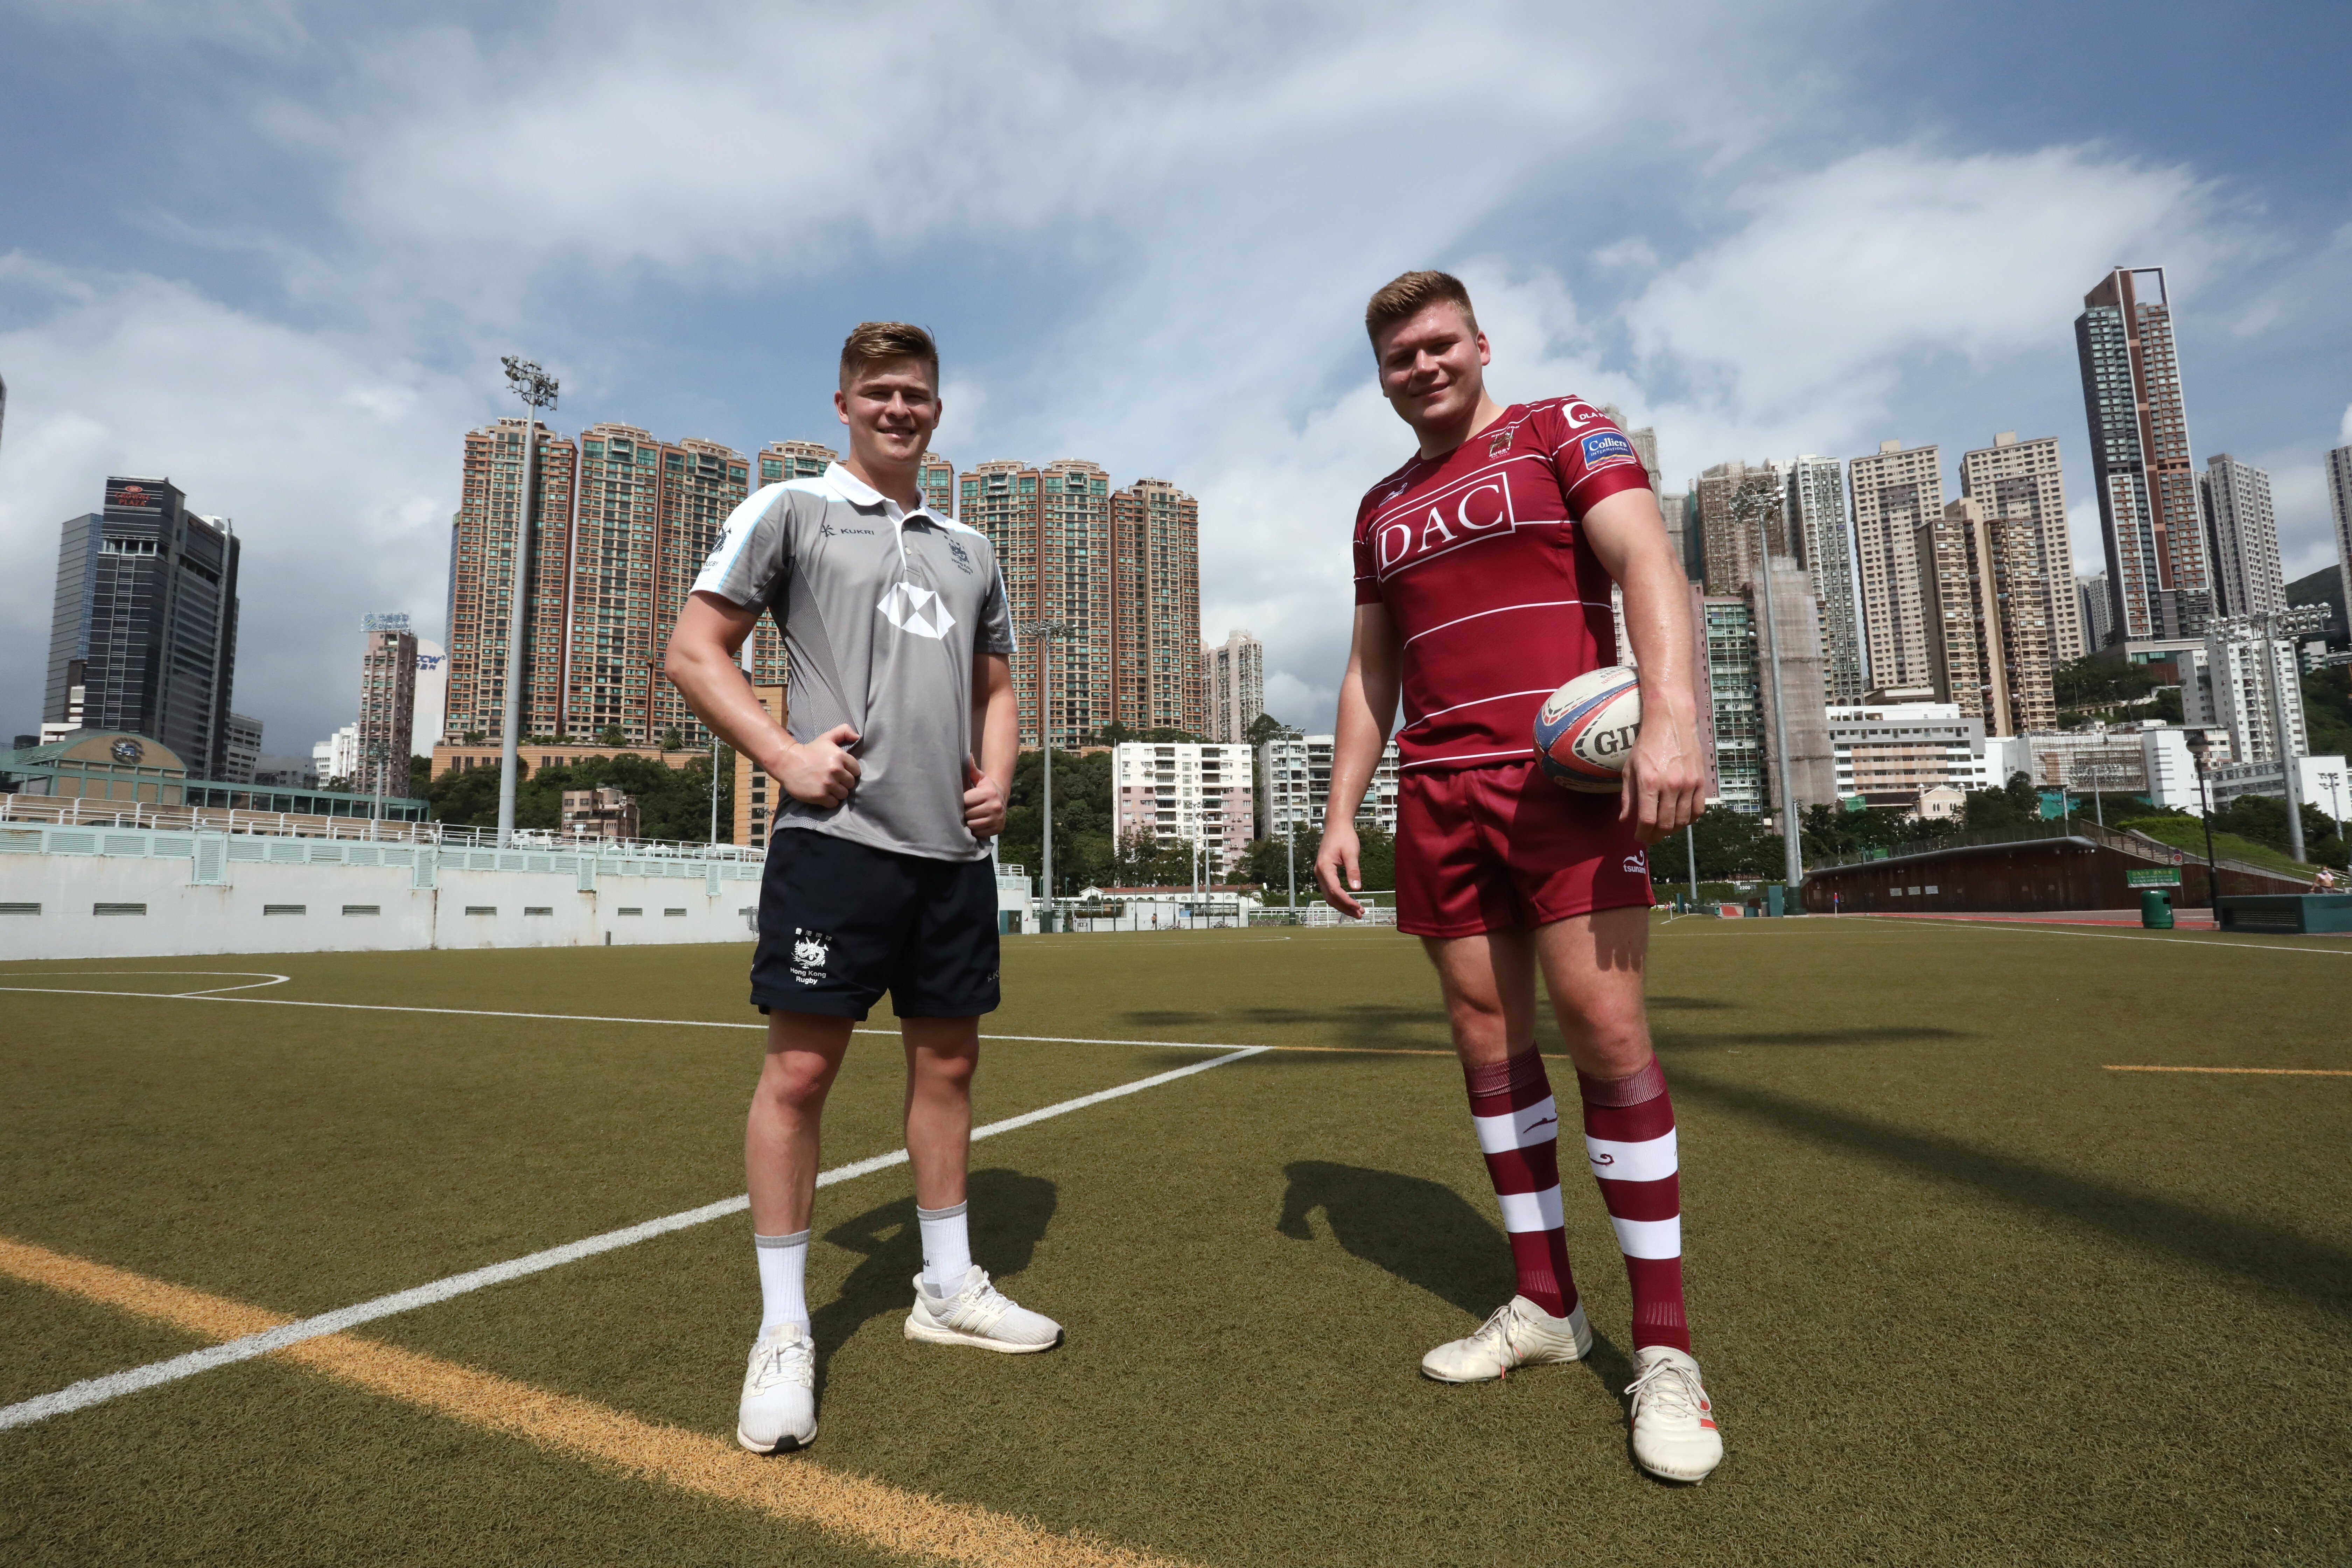 Scottish rugby player Euan McLaren will play for Kowloon RFC in this season’s Premiership. Photo: Jonathan Wong